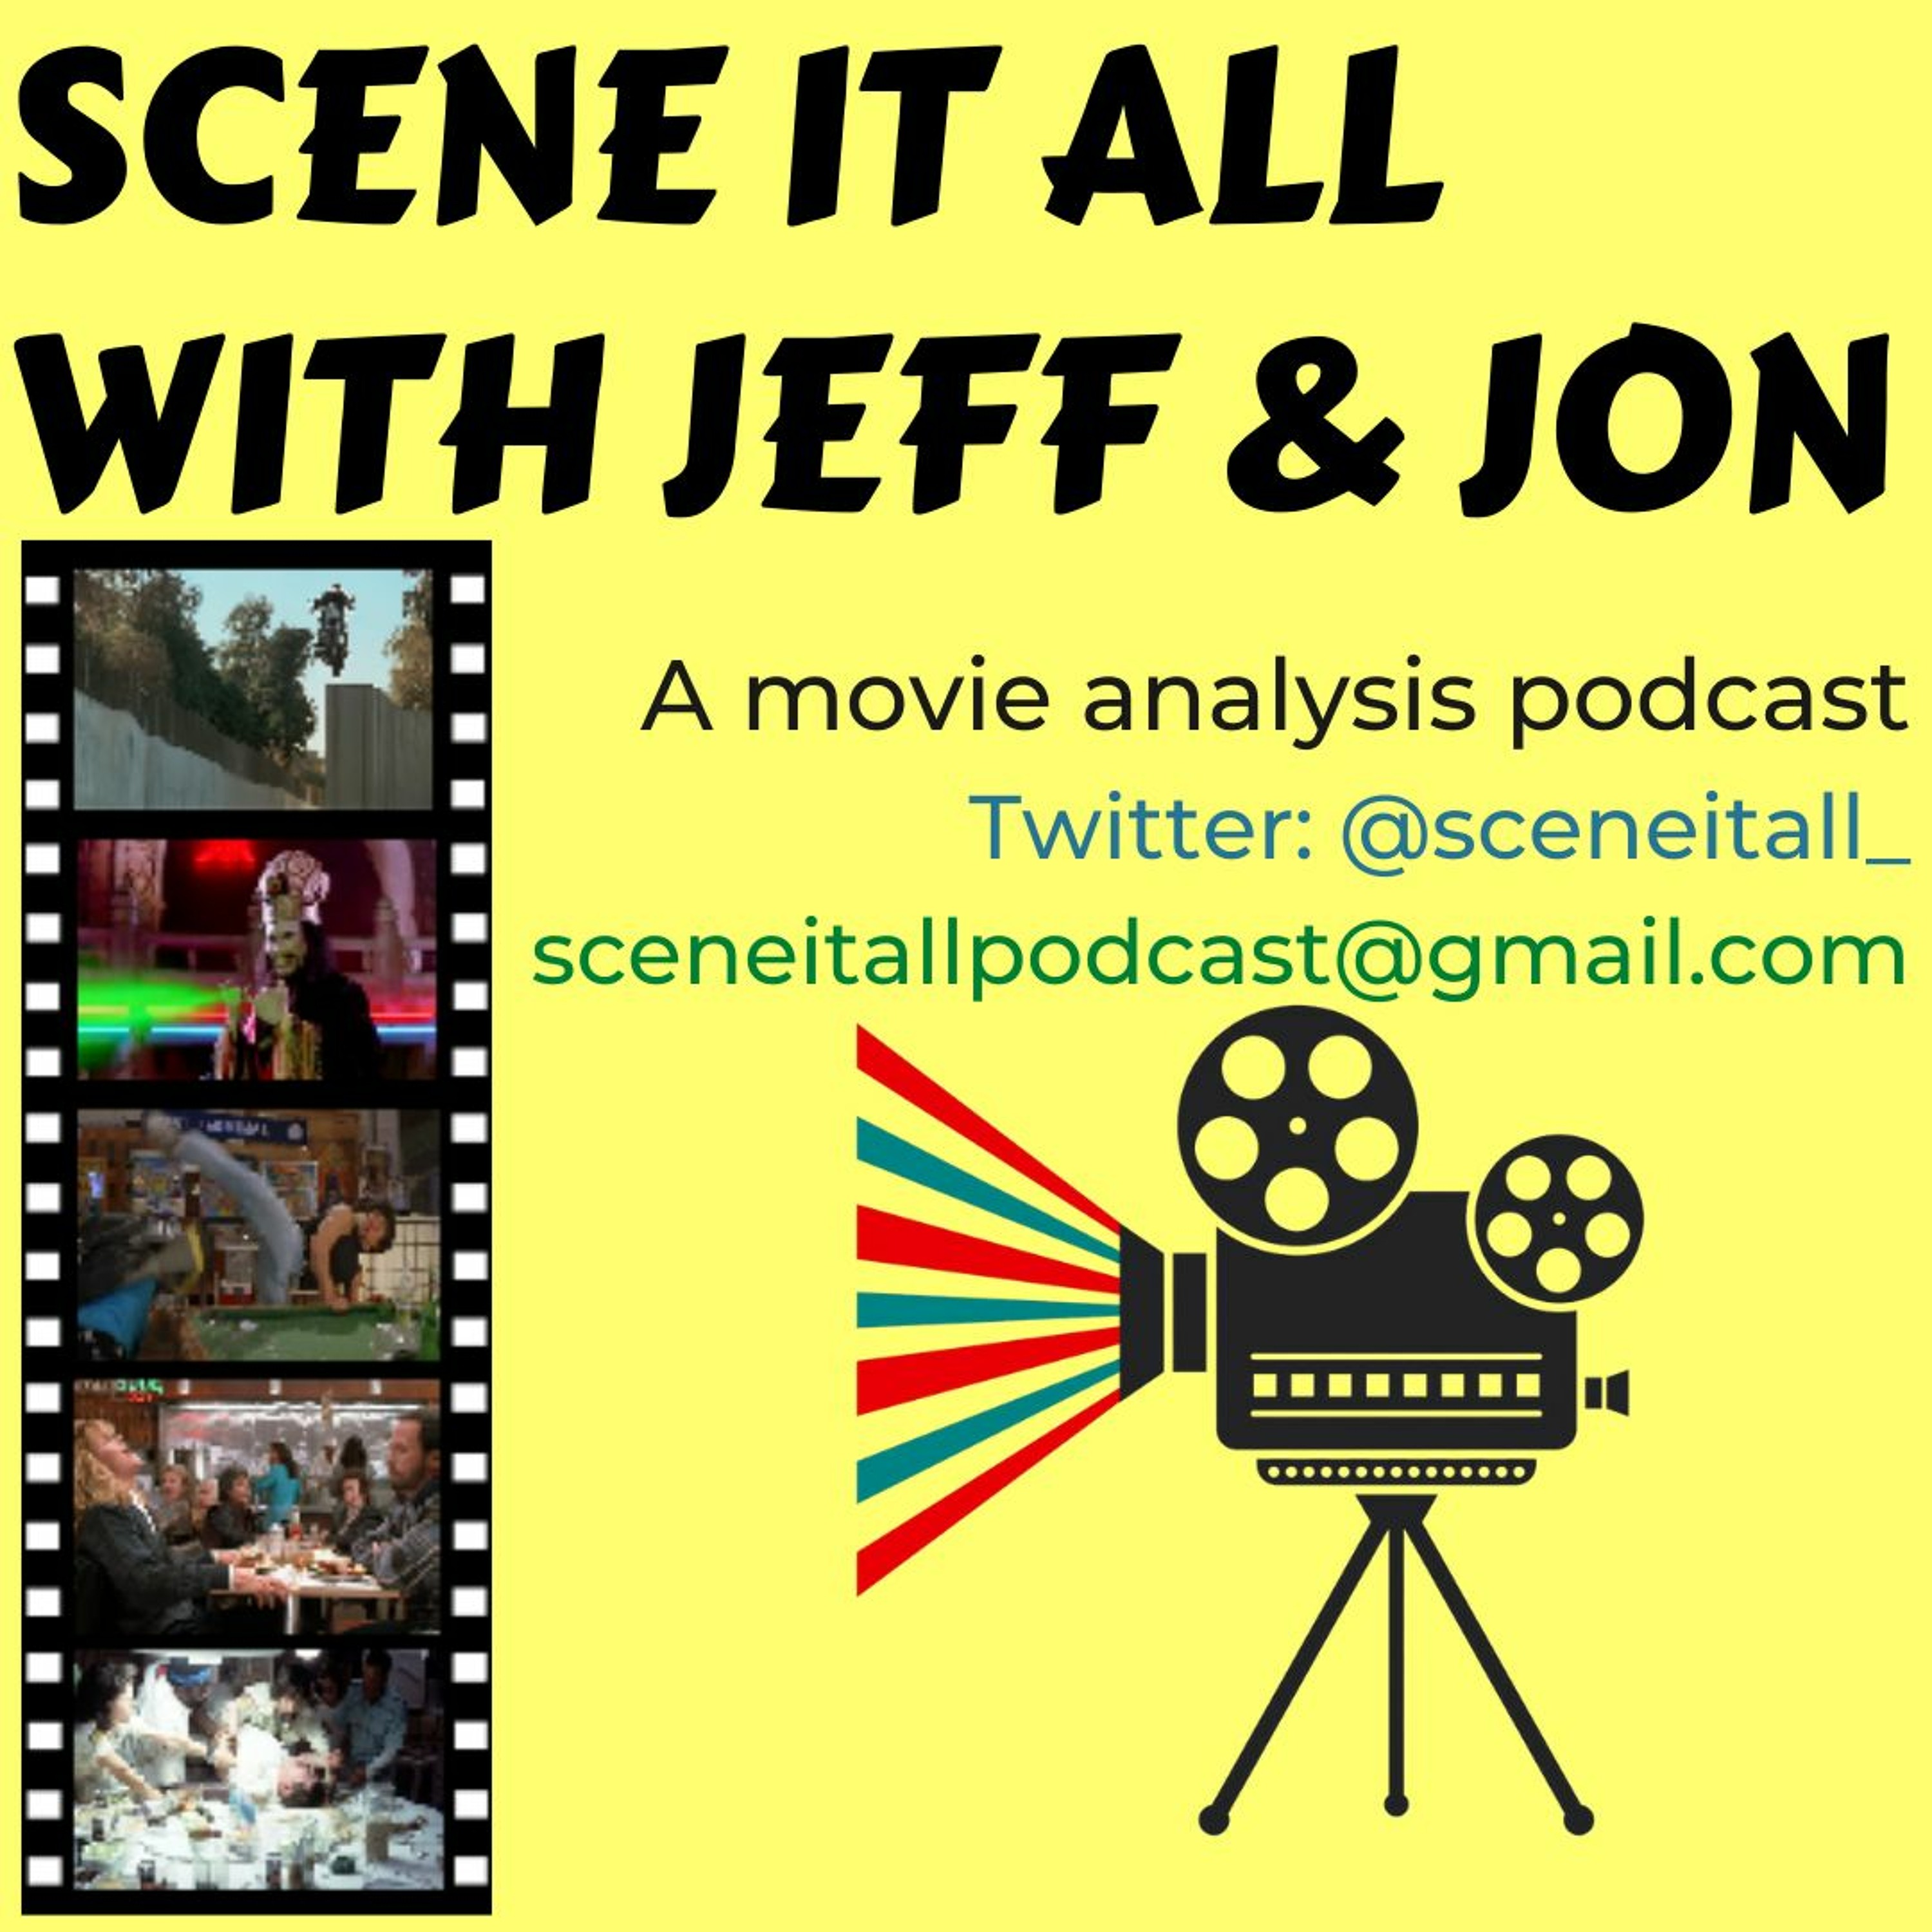 Scene It All with Jeff & Jon - Episode 10 - North By Northwest (1959) - Crop Duster Plane Chase